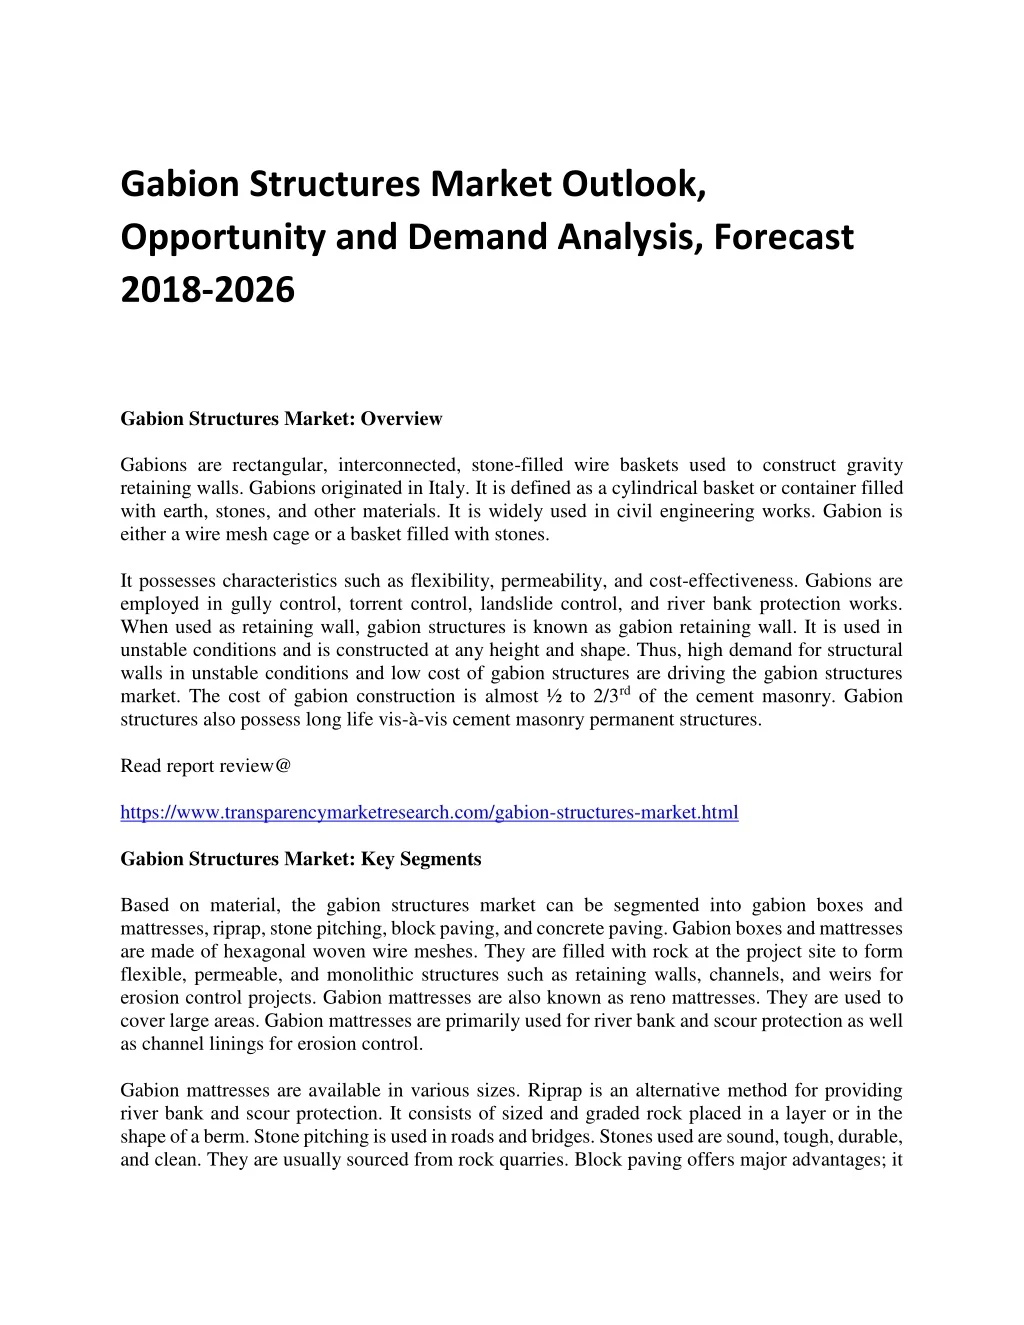 gabion structures market outlook opportunity